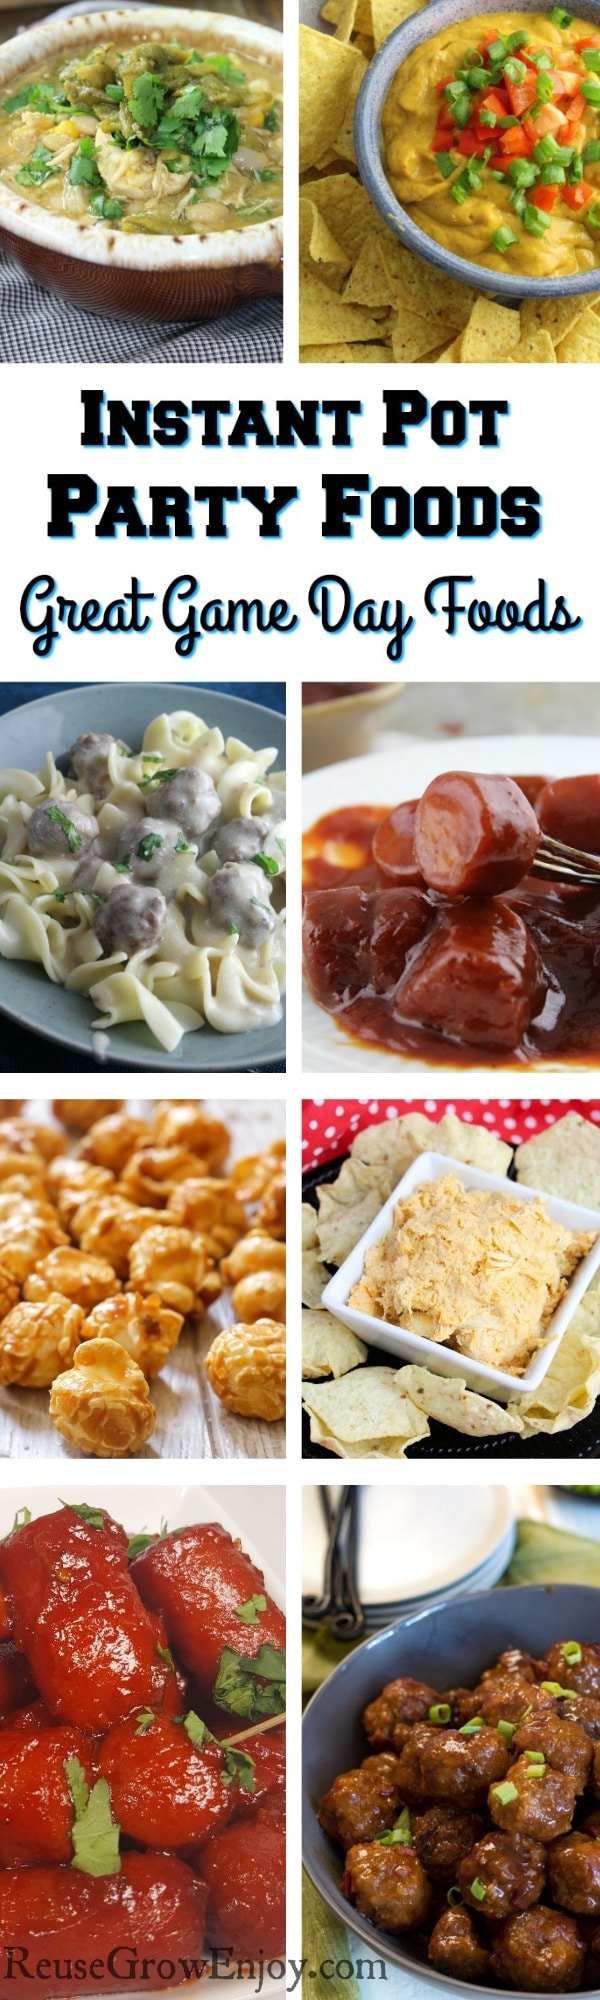 Having a party or get together and looking for easy party foods? If you have an Instant Pot, I have rounded up some of the best Instant Pot party foods for you. These make for some great game day foods!